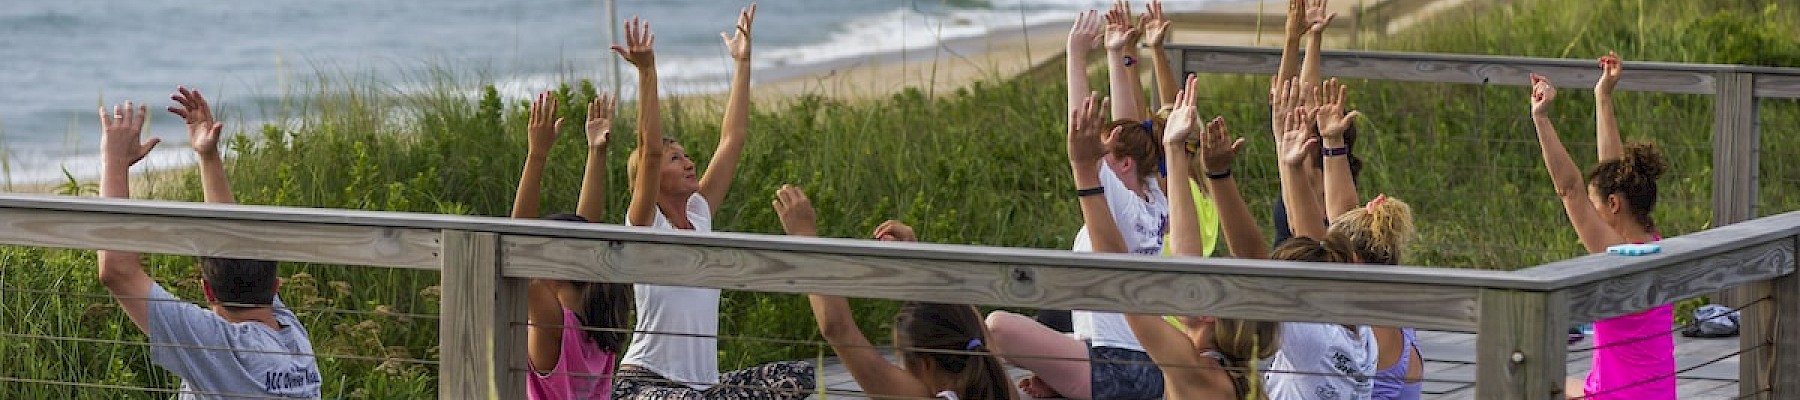 A group of people is practicing yoga on a wooden deck, stretching with raised arms, alongside an ocean shoreline, enjoying the scenic view.